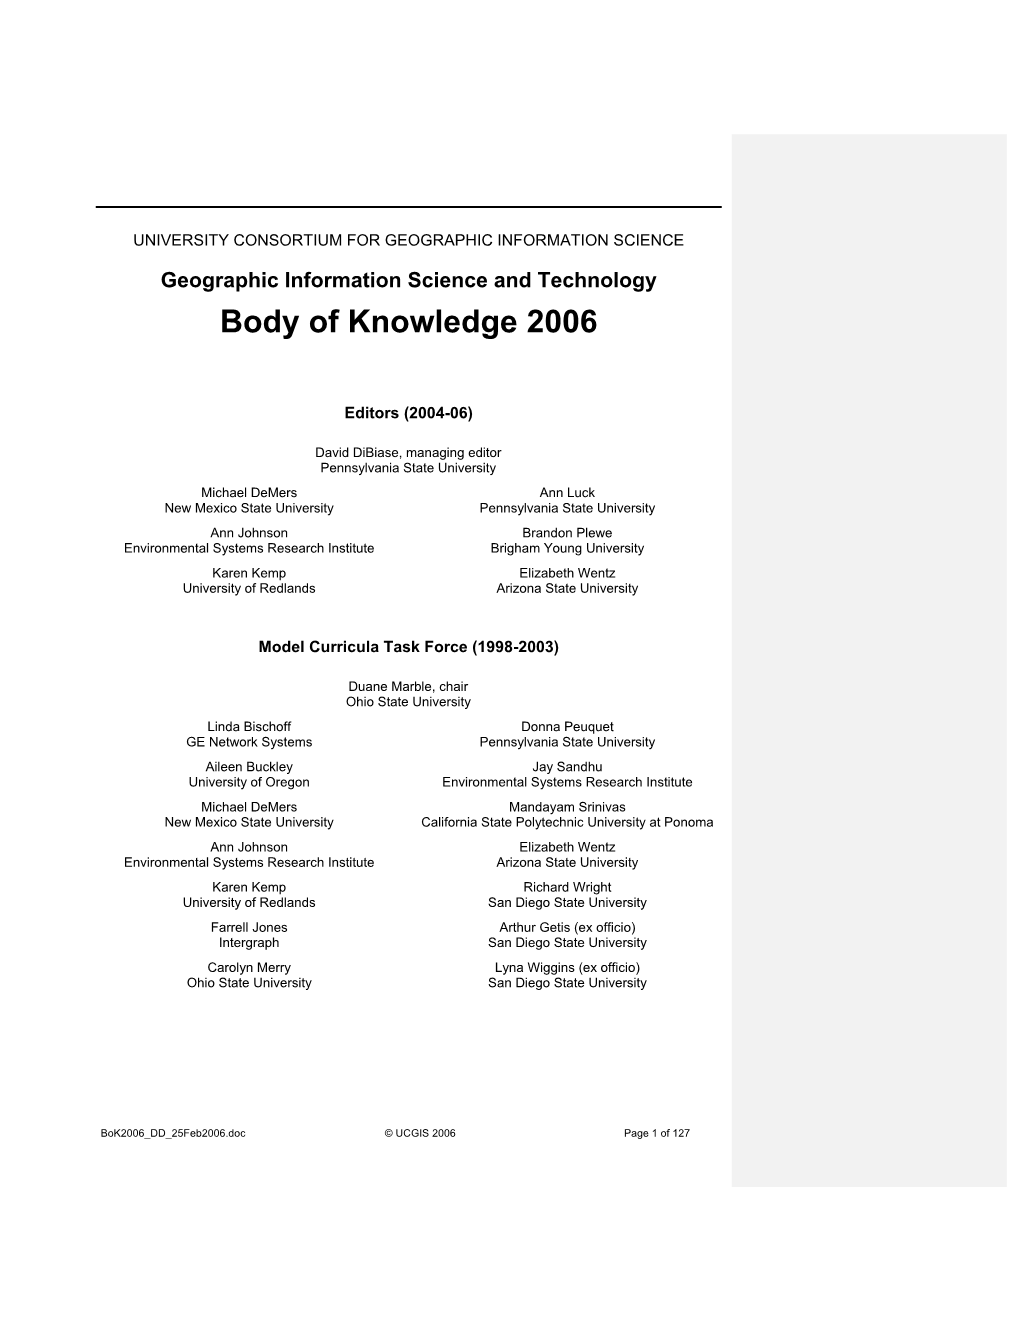 Body of Knowledge 2006